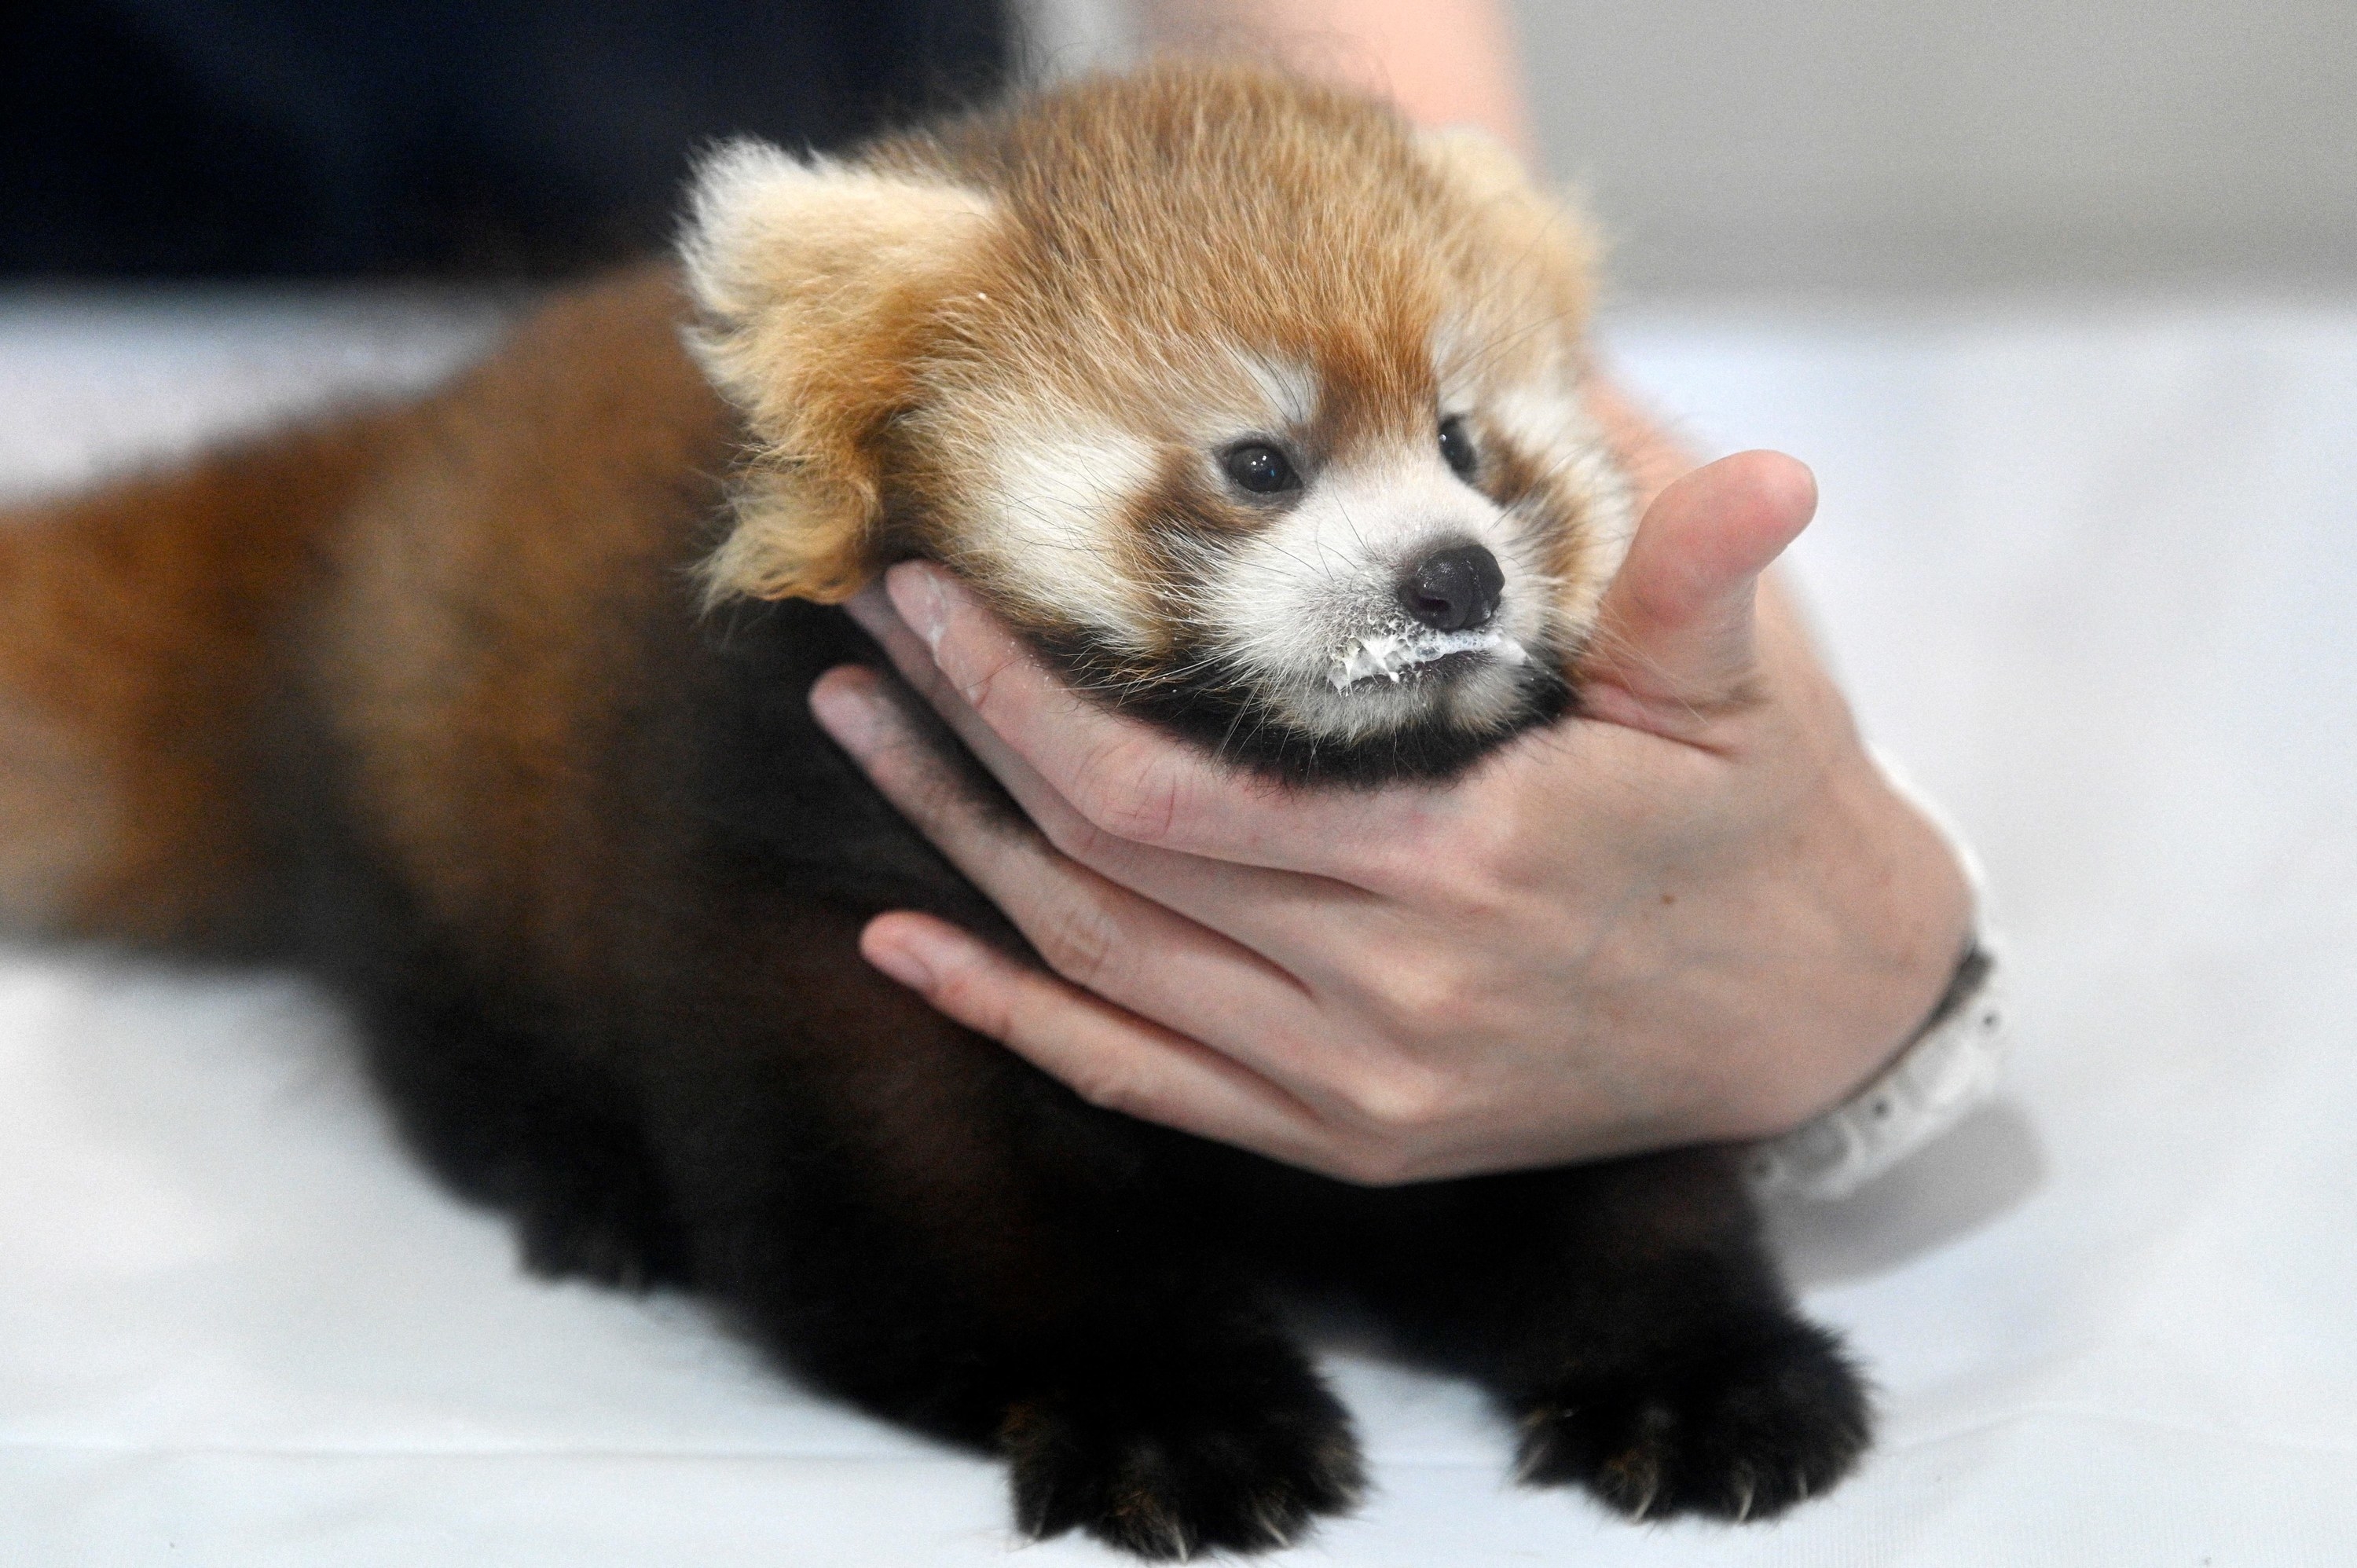 A nearly two-month-old female red panda cub is nursed by a staff member during a media event at the Hakkeijima Sea Paradise in Yokohama on September 6, 2022.